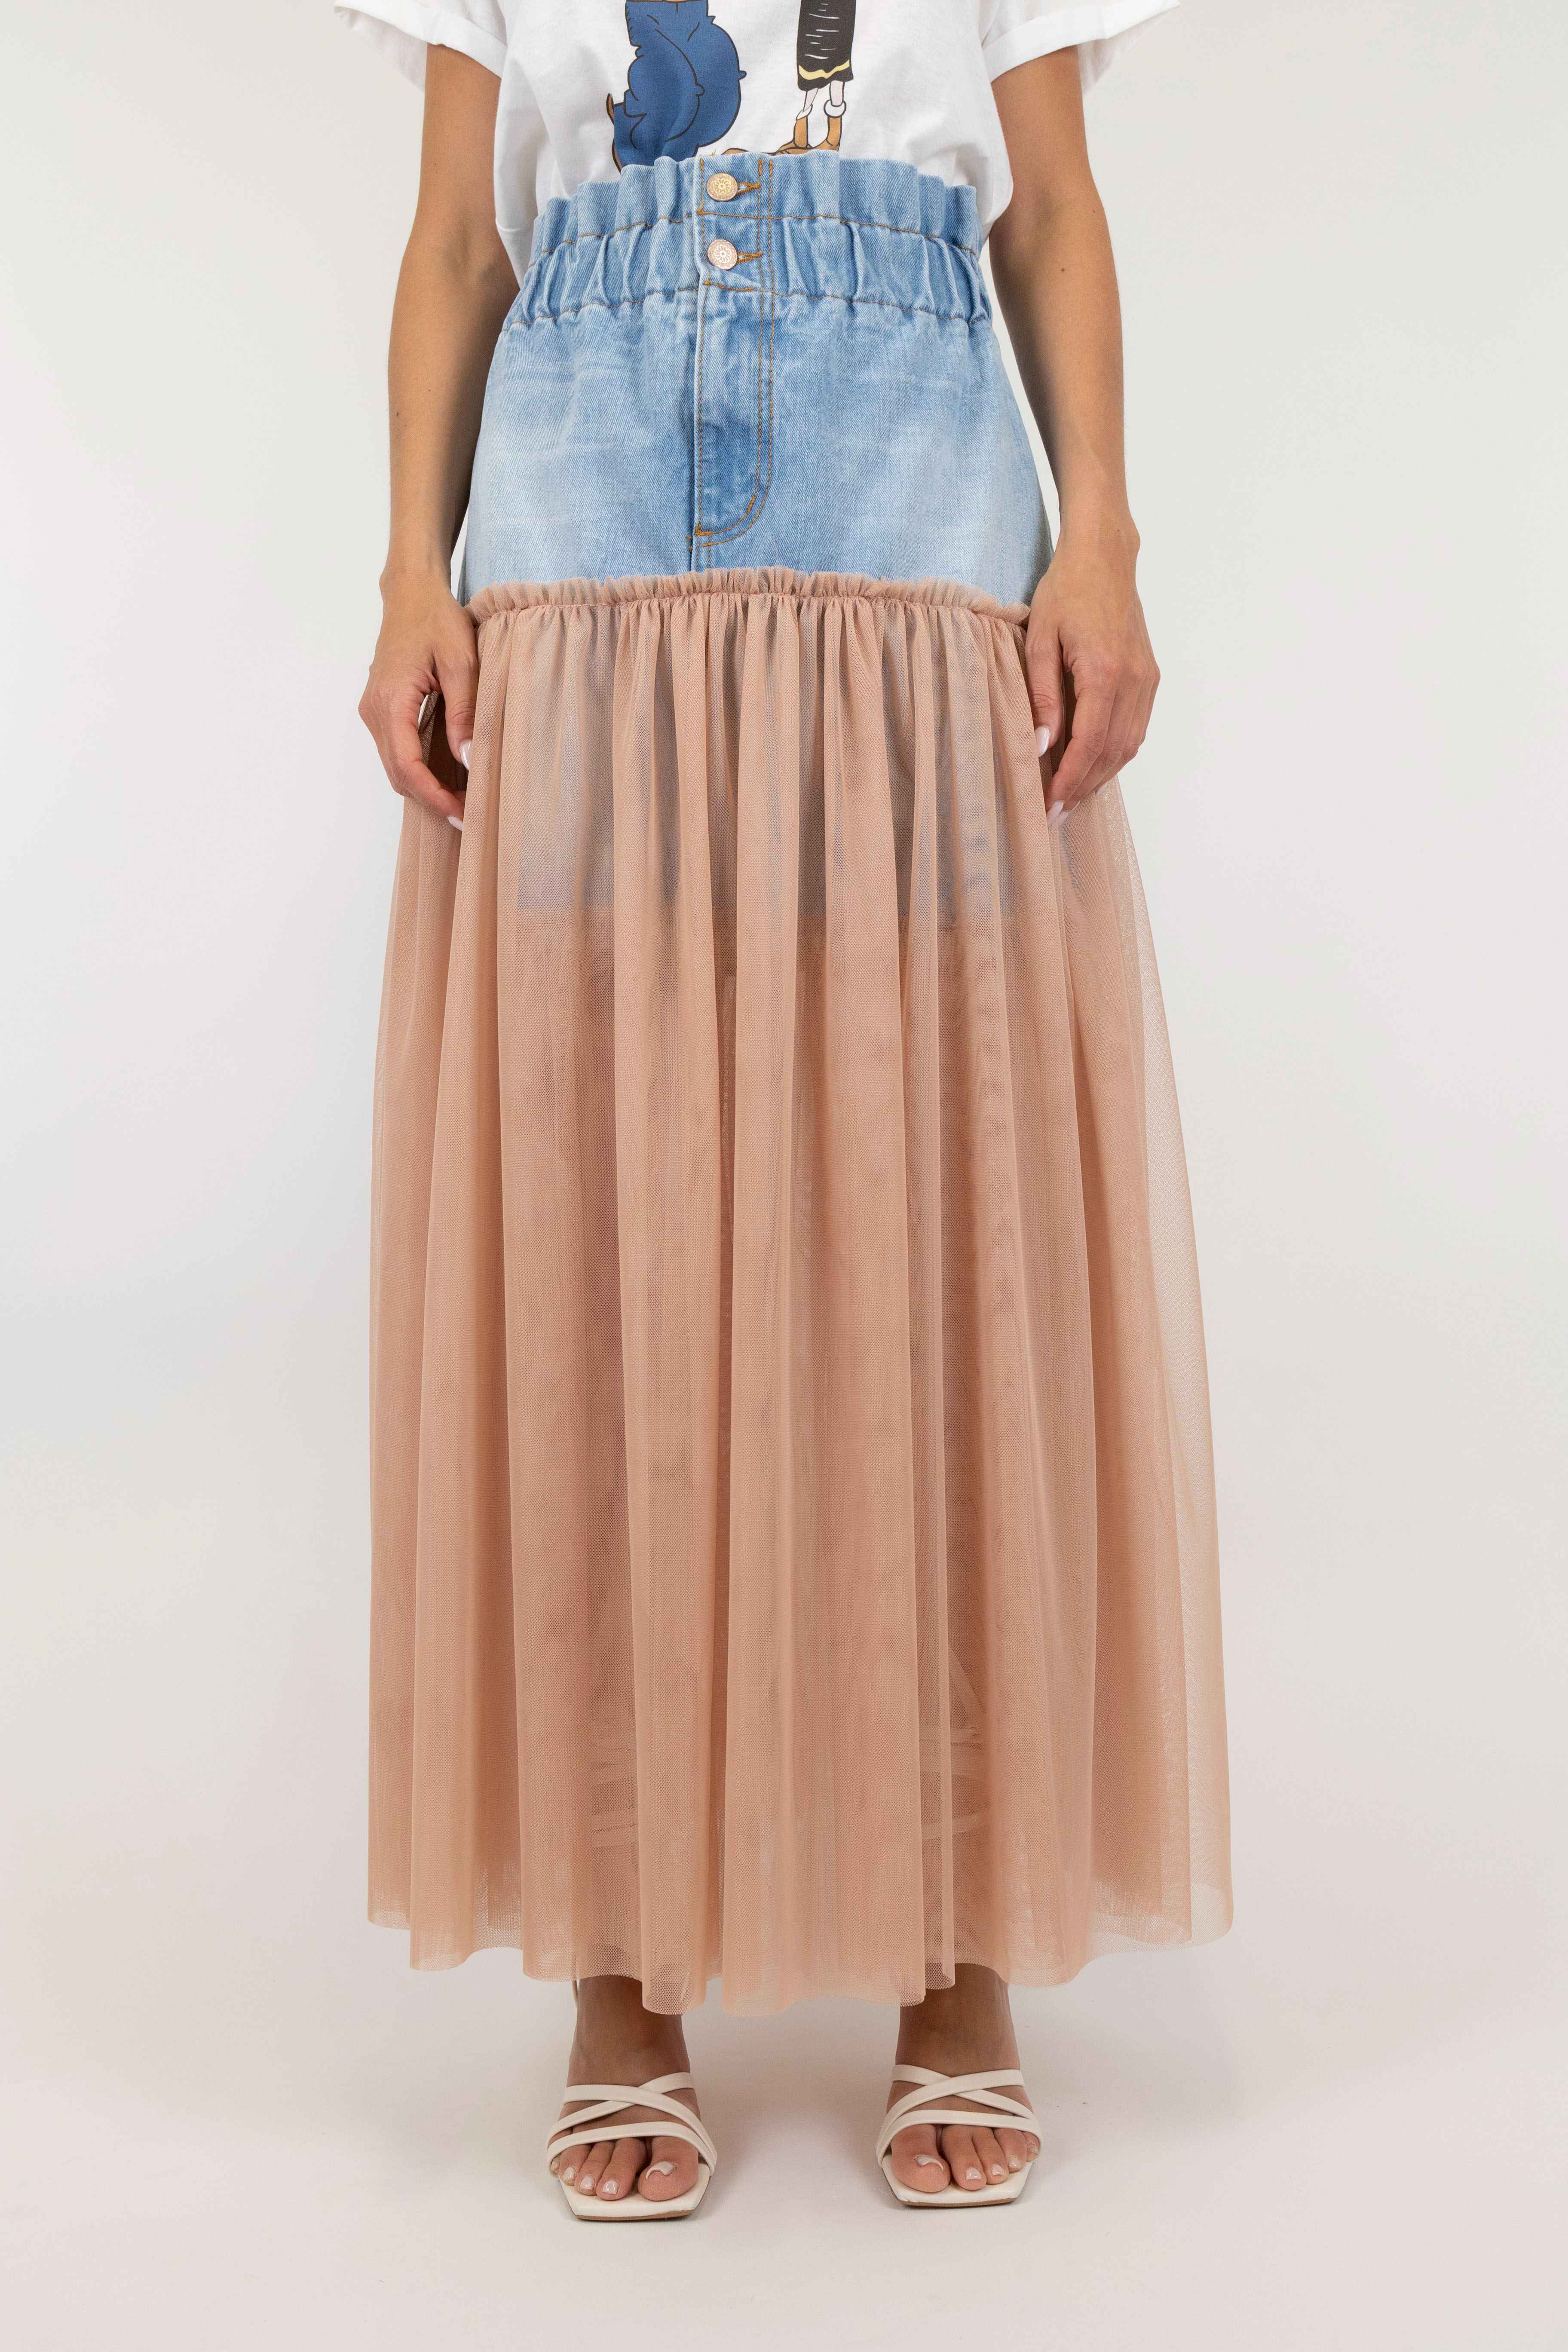 Tension in - High-waisted skirt in denim and tulle